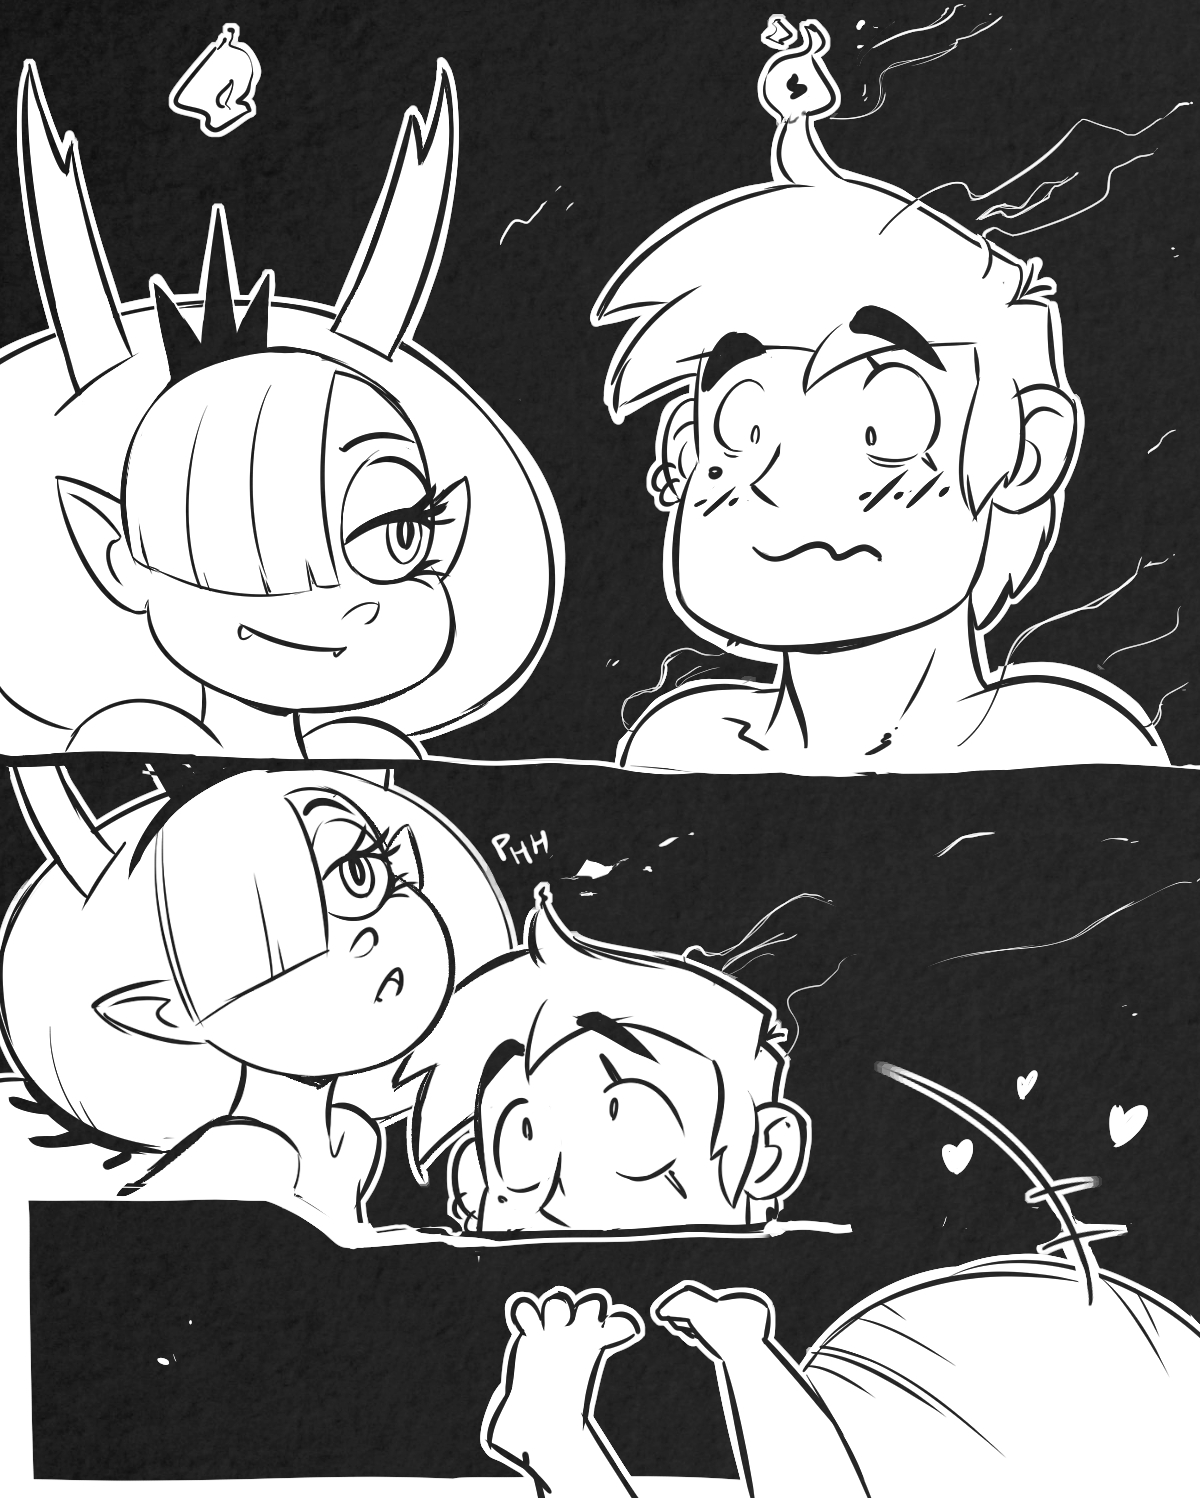 Hekapoo – Star Vs The Forces of Evil - 11